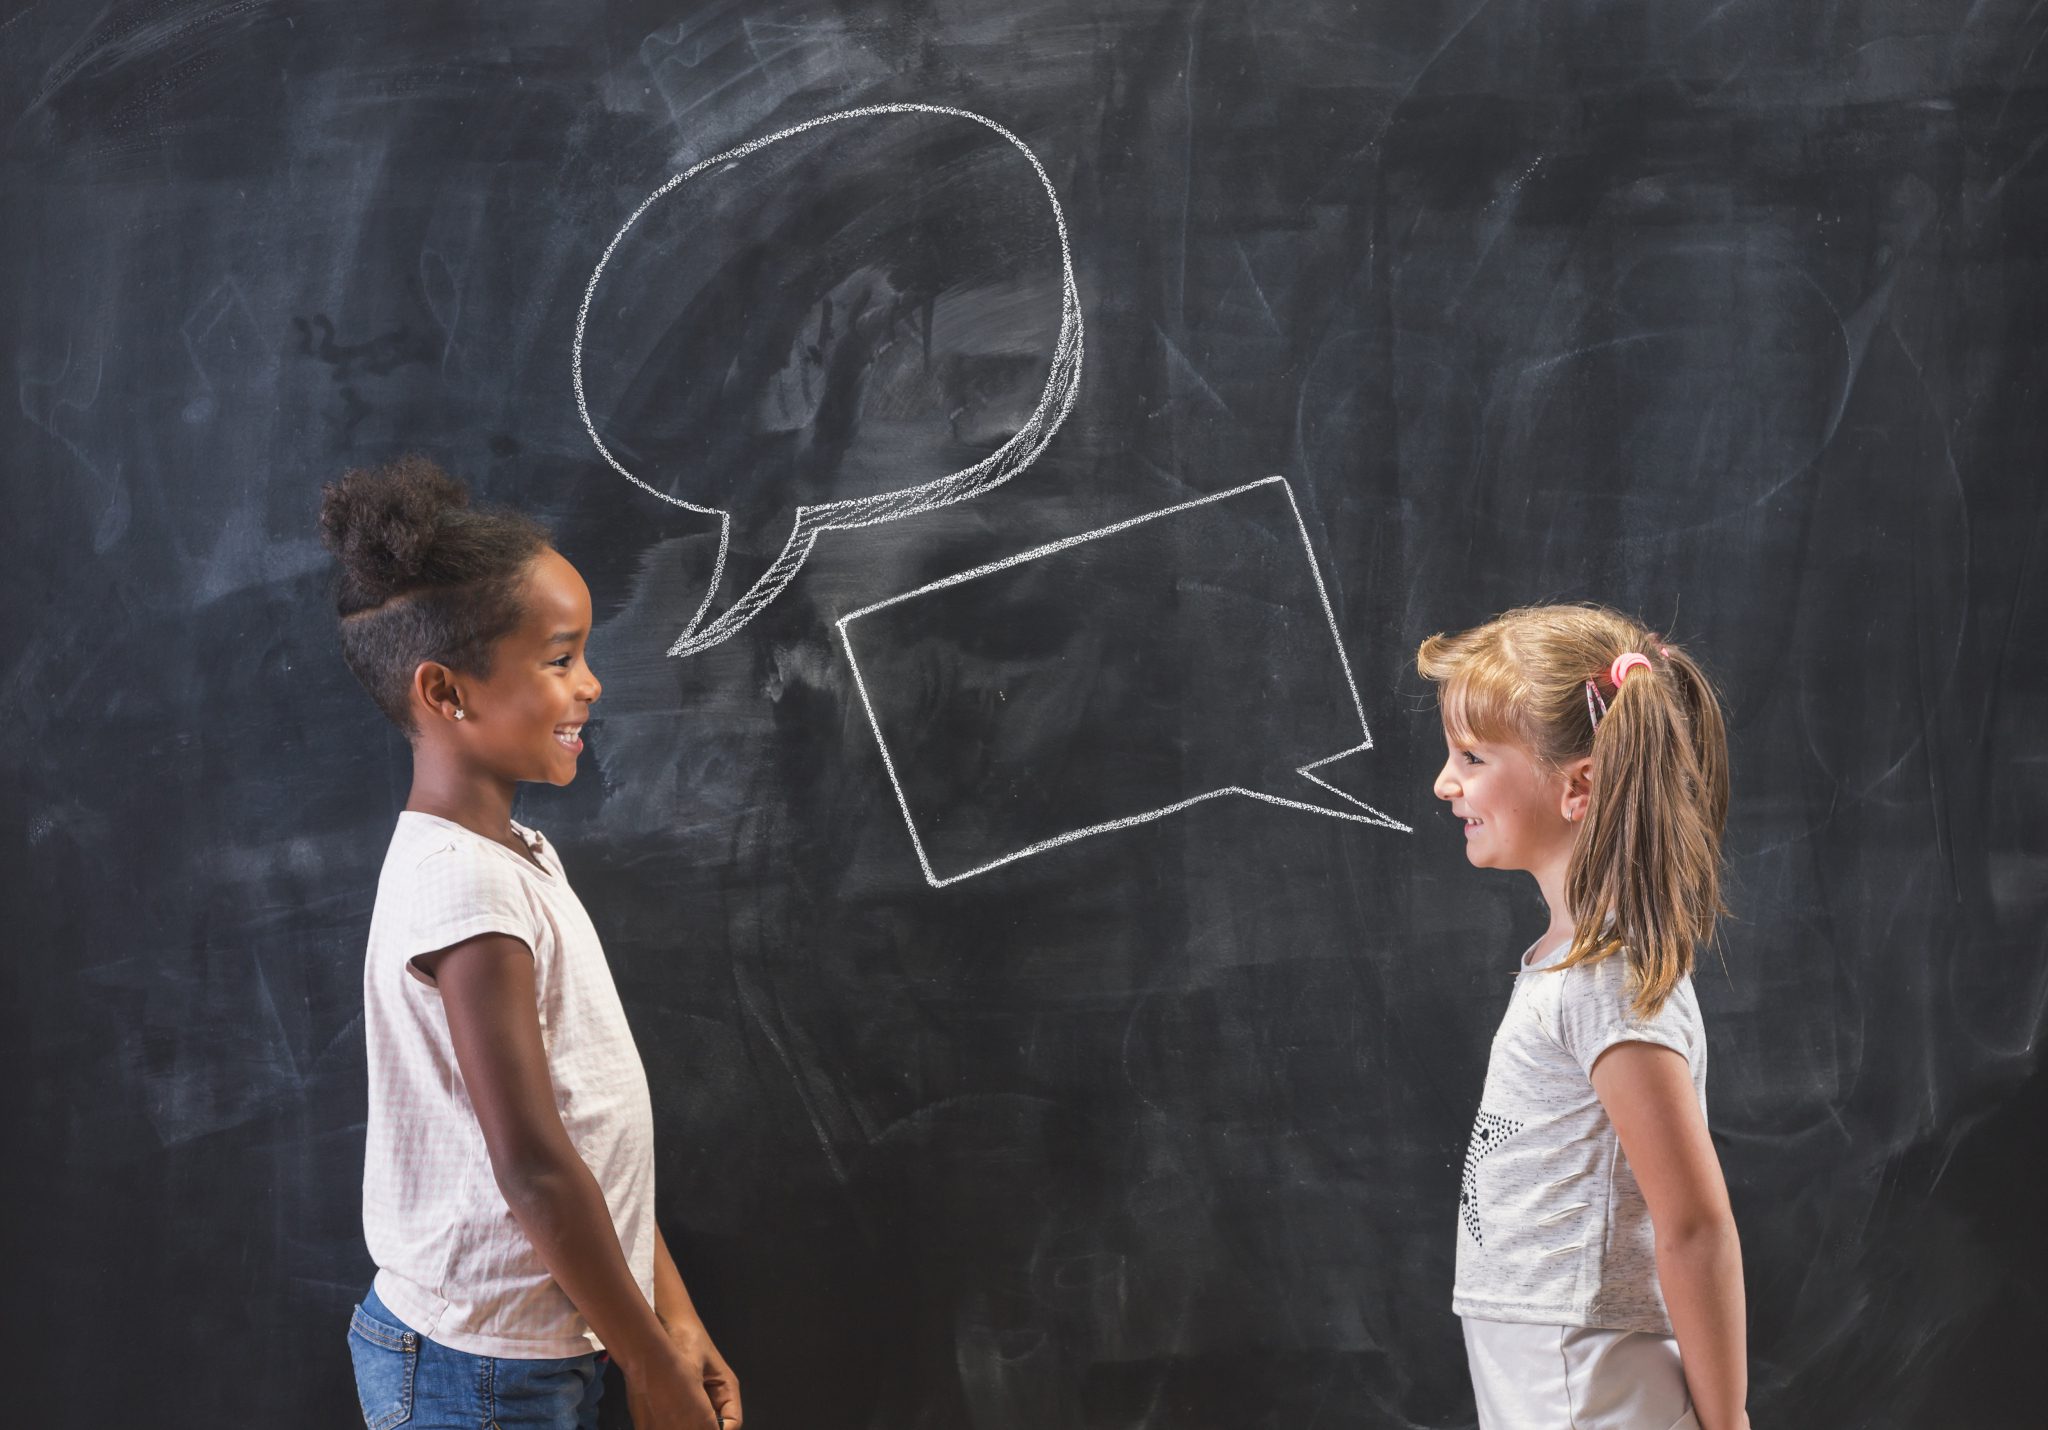 Using class discussions to teach social-emotional learning